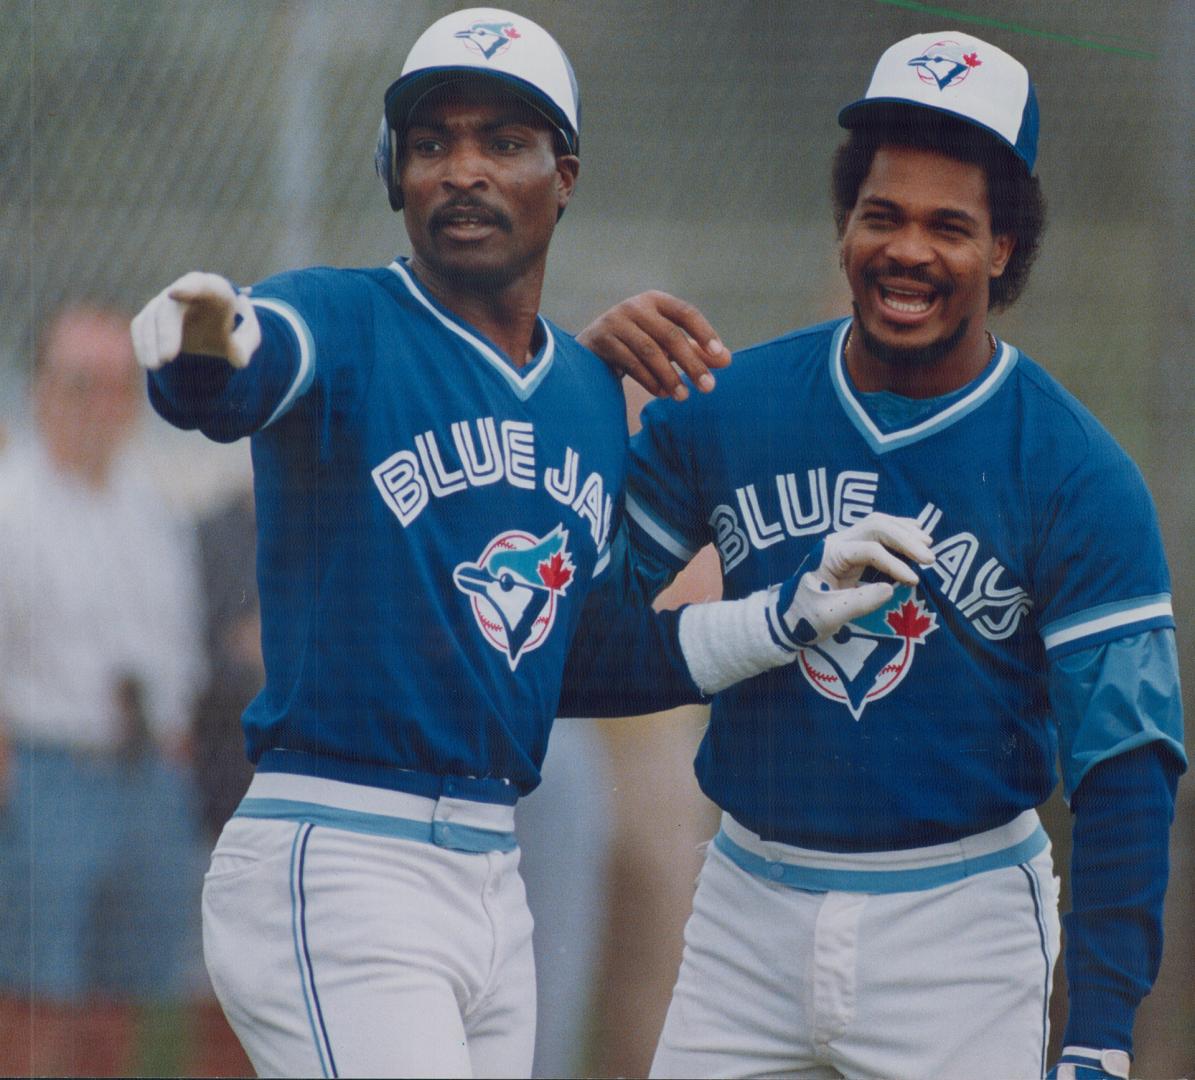 George Bell: His first-pitch popup ended the Blue Jays' early threat